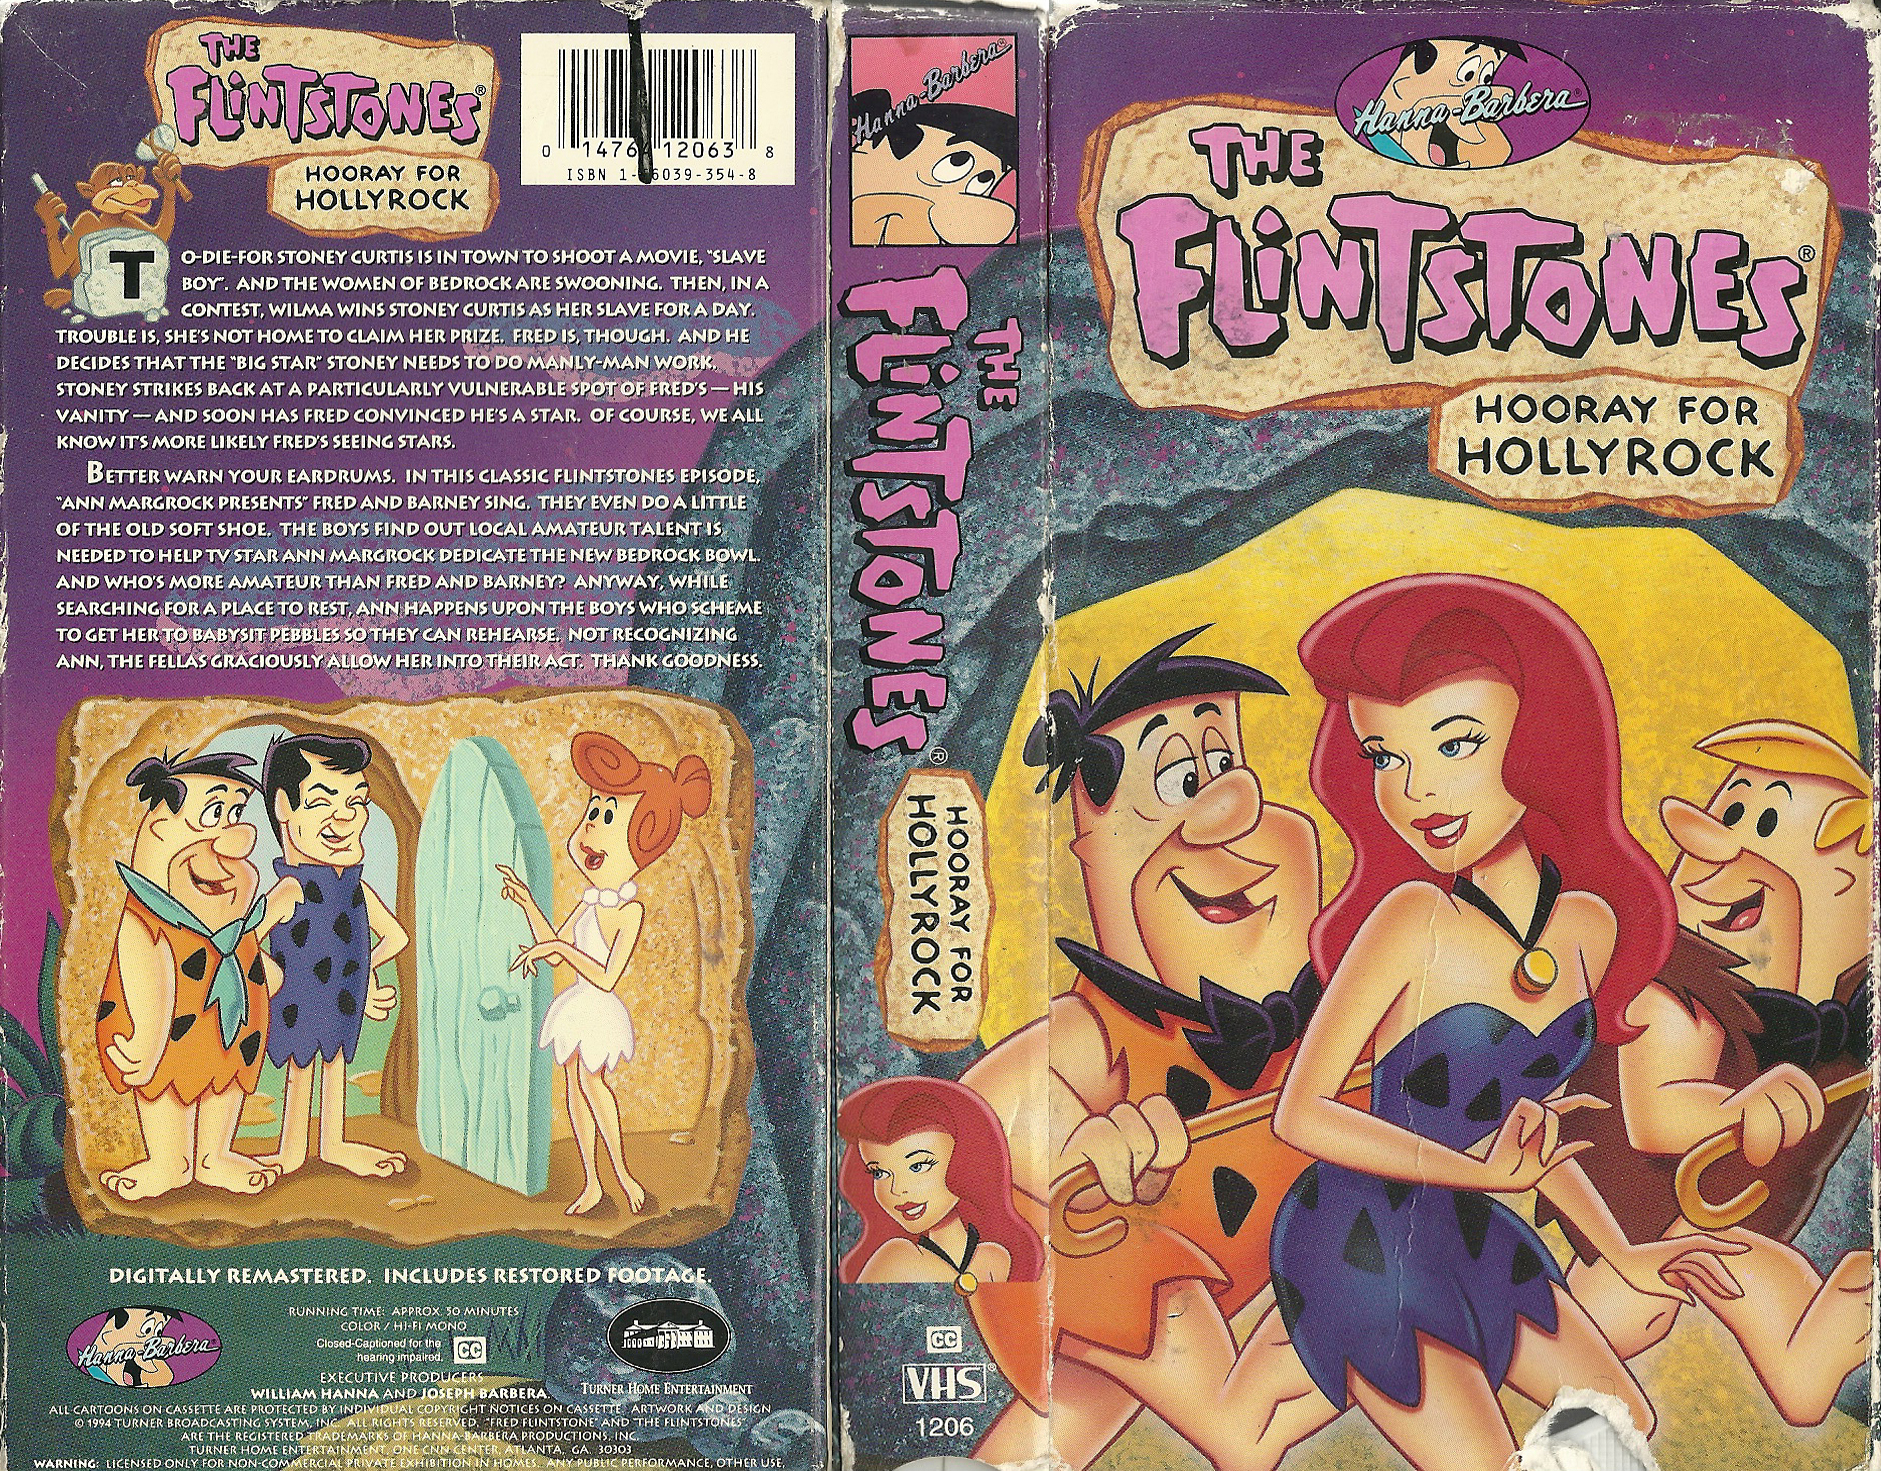 June 11 2011 VHS cover scan - click for high res version the flintstones : ...